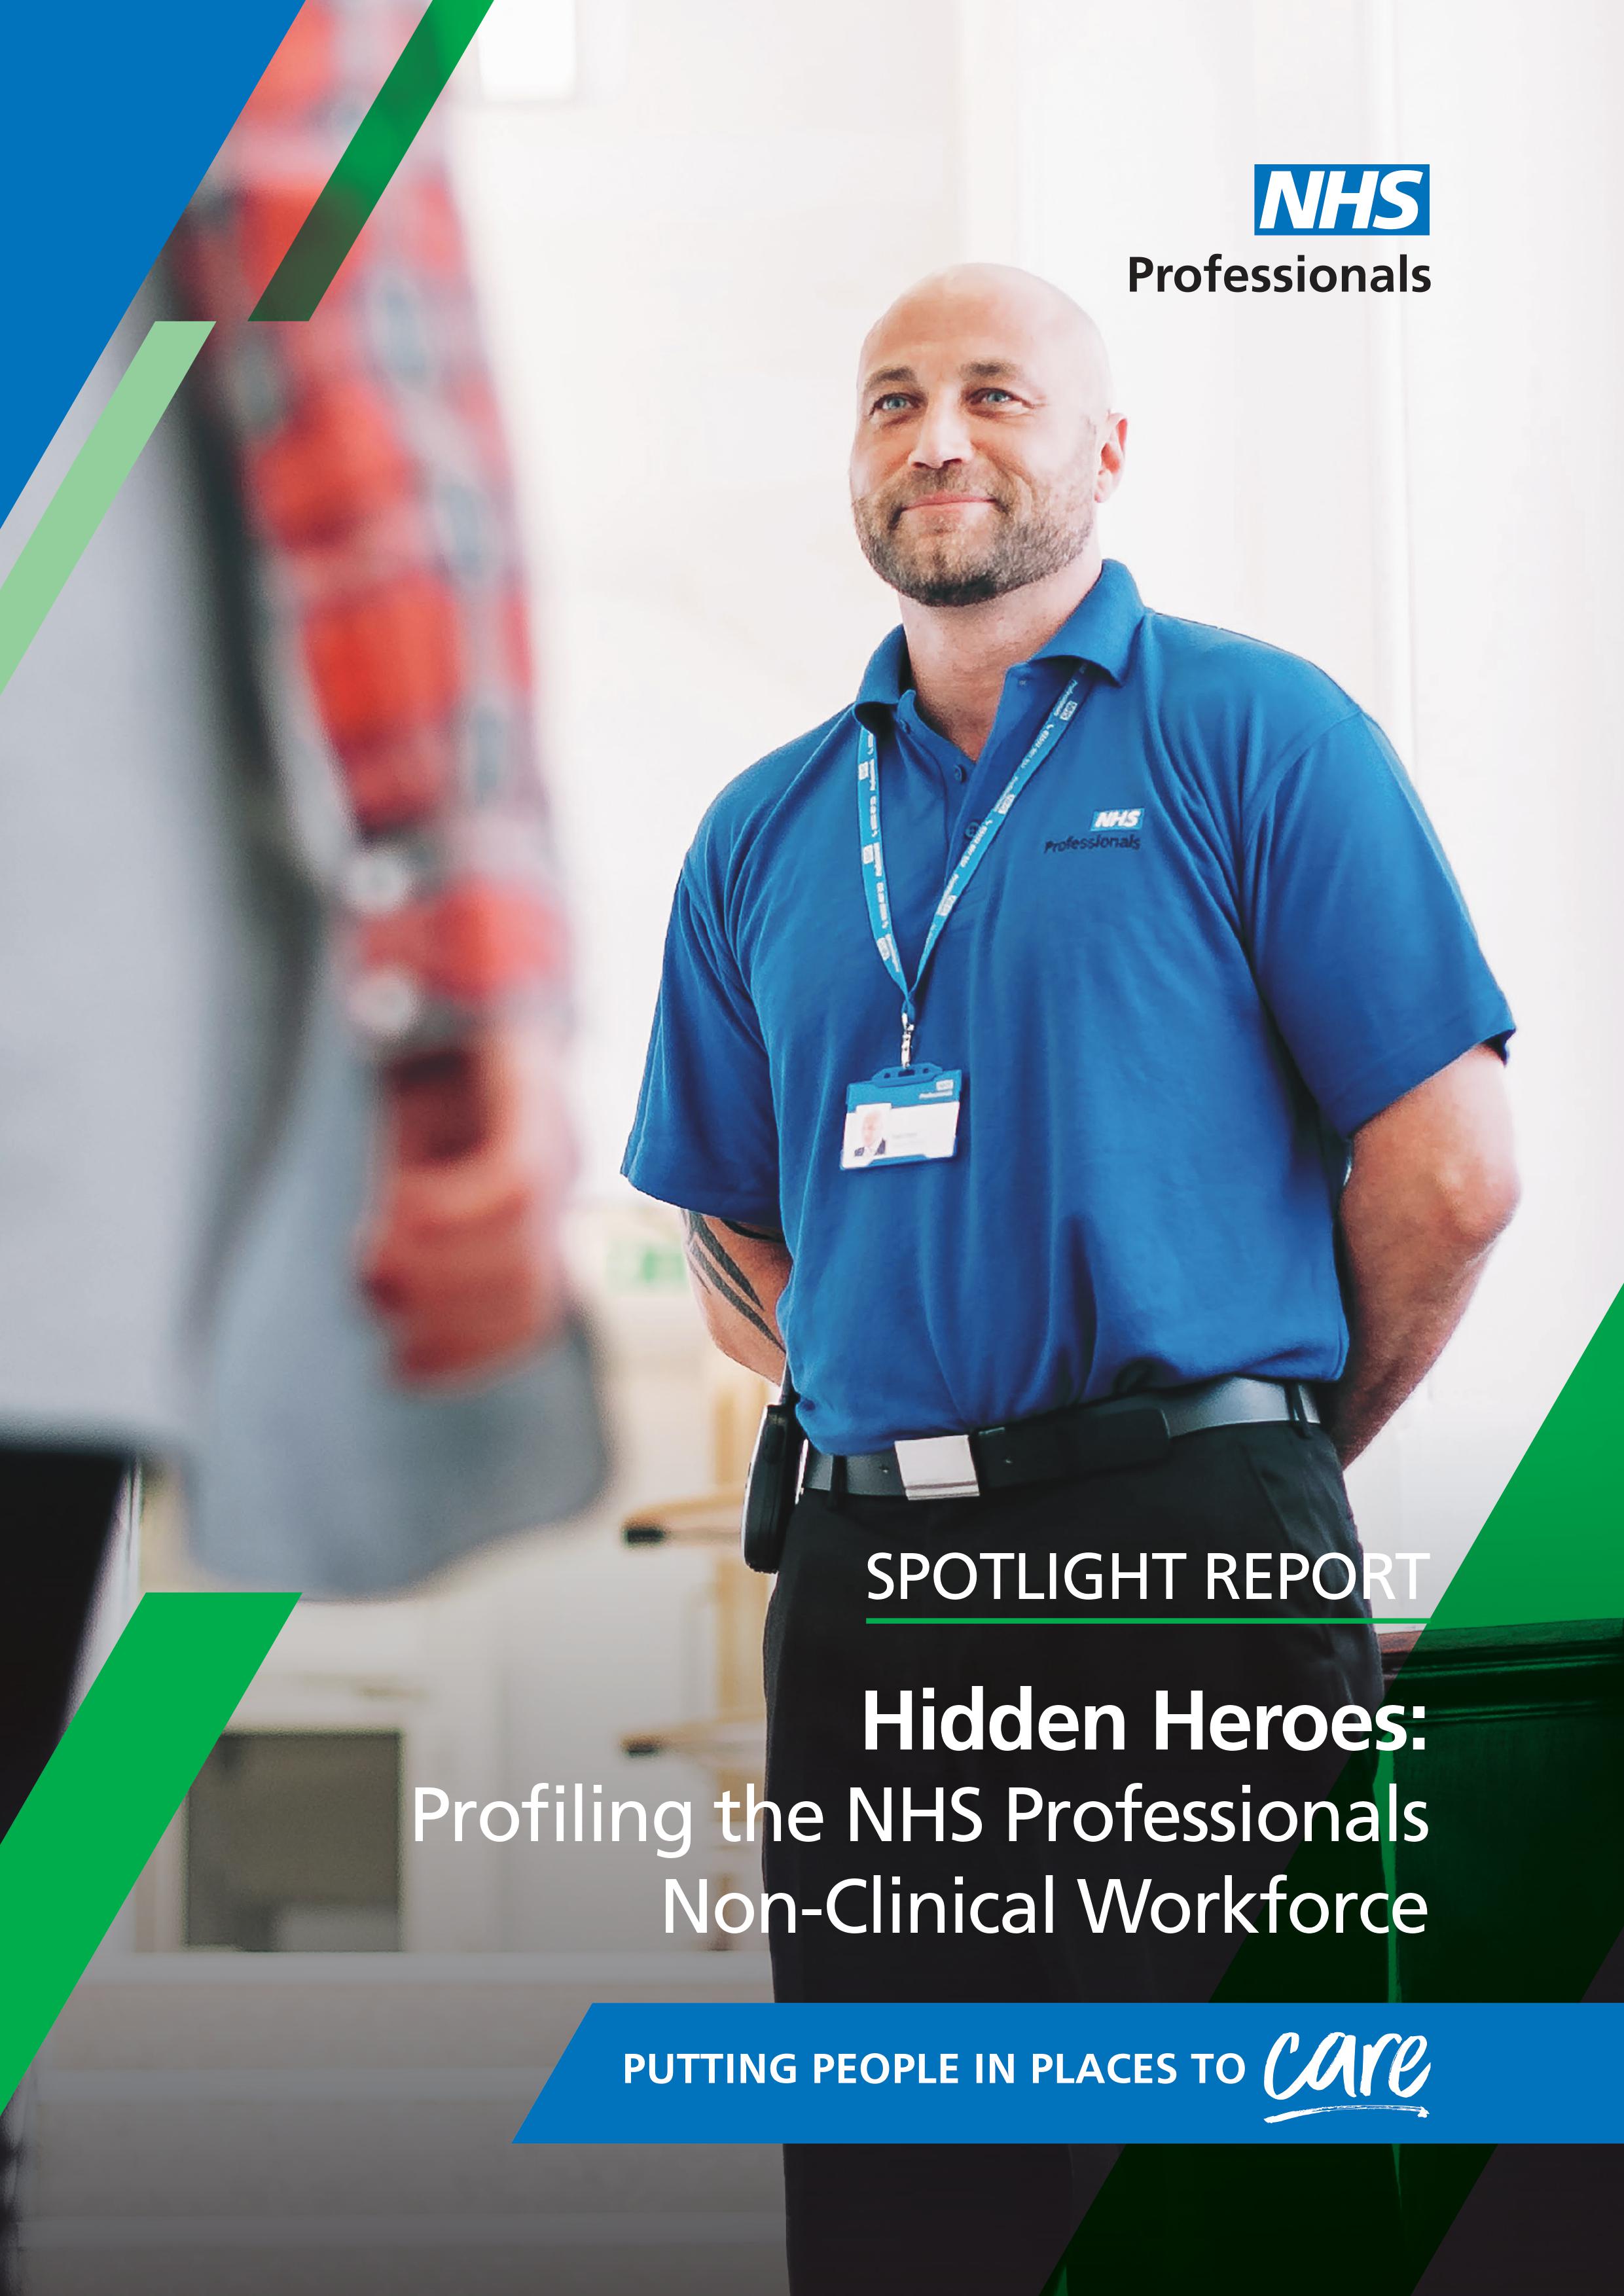 Hidden Heroes: Profiling the NHS Professionals Non-Clinical Workforce